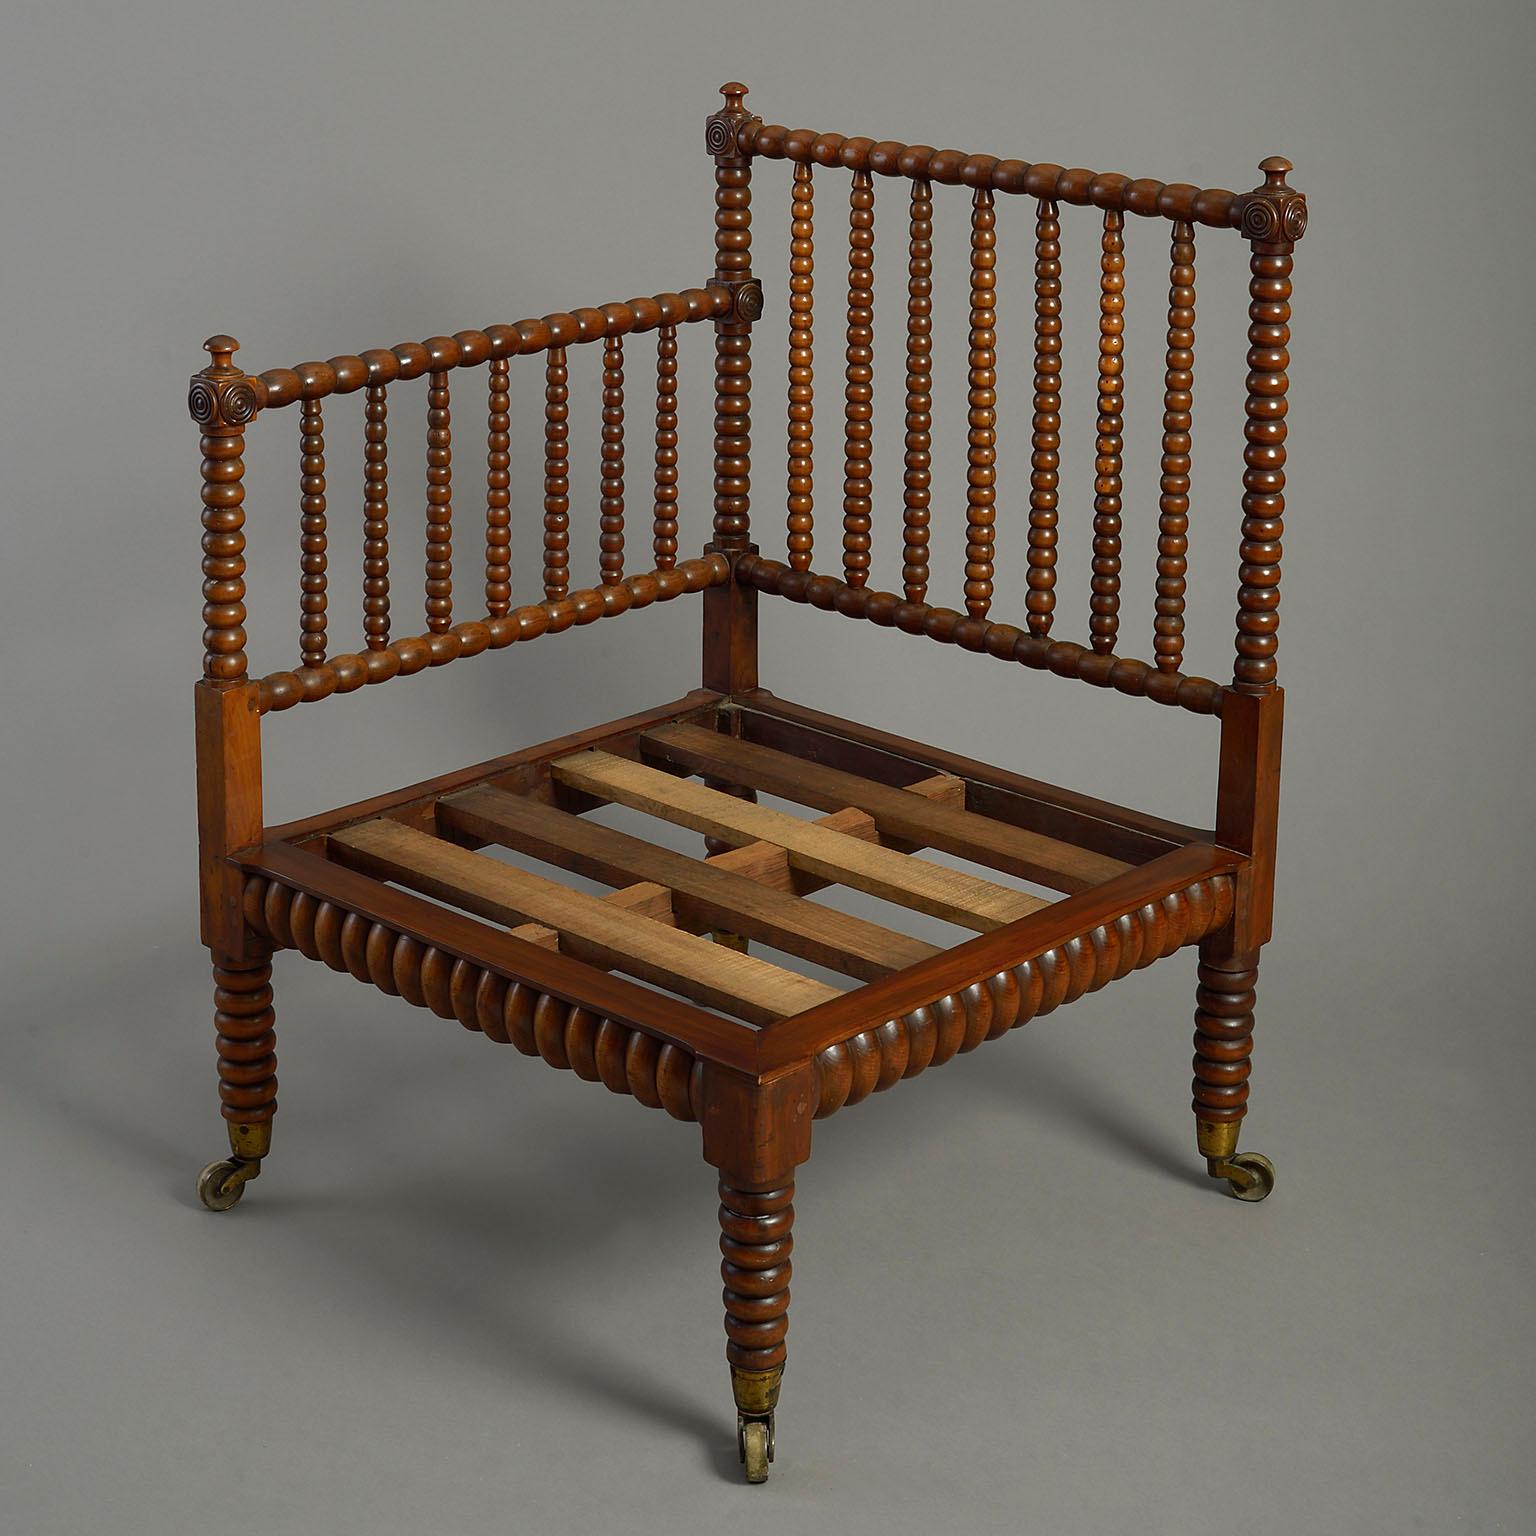 An early 19th century Regency Period bobbin turned yew wood corner chair, the frame headed by finials roundels, the slatted seat supporting a loose leather covered cushion, all raised on bobbin turned tapering legs and terminating in brass